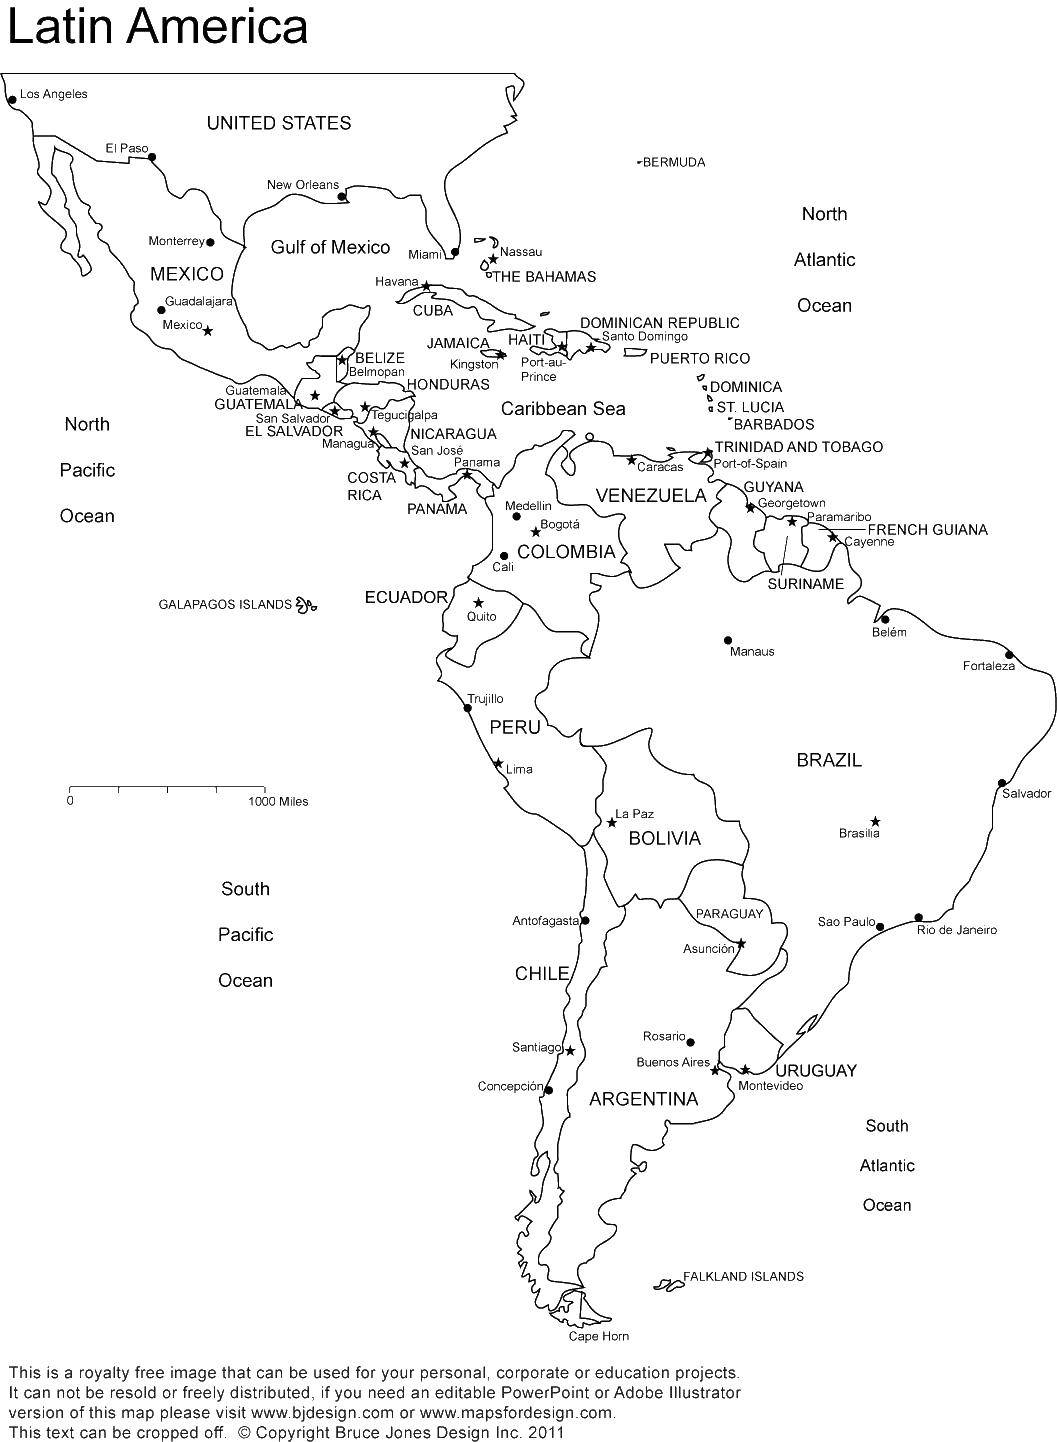 Coloring Latin America. Category Maps. Tags:  Map, world.